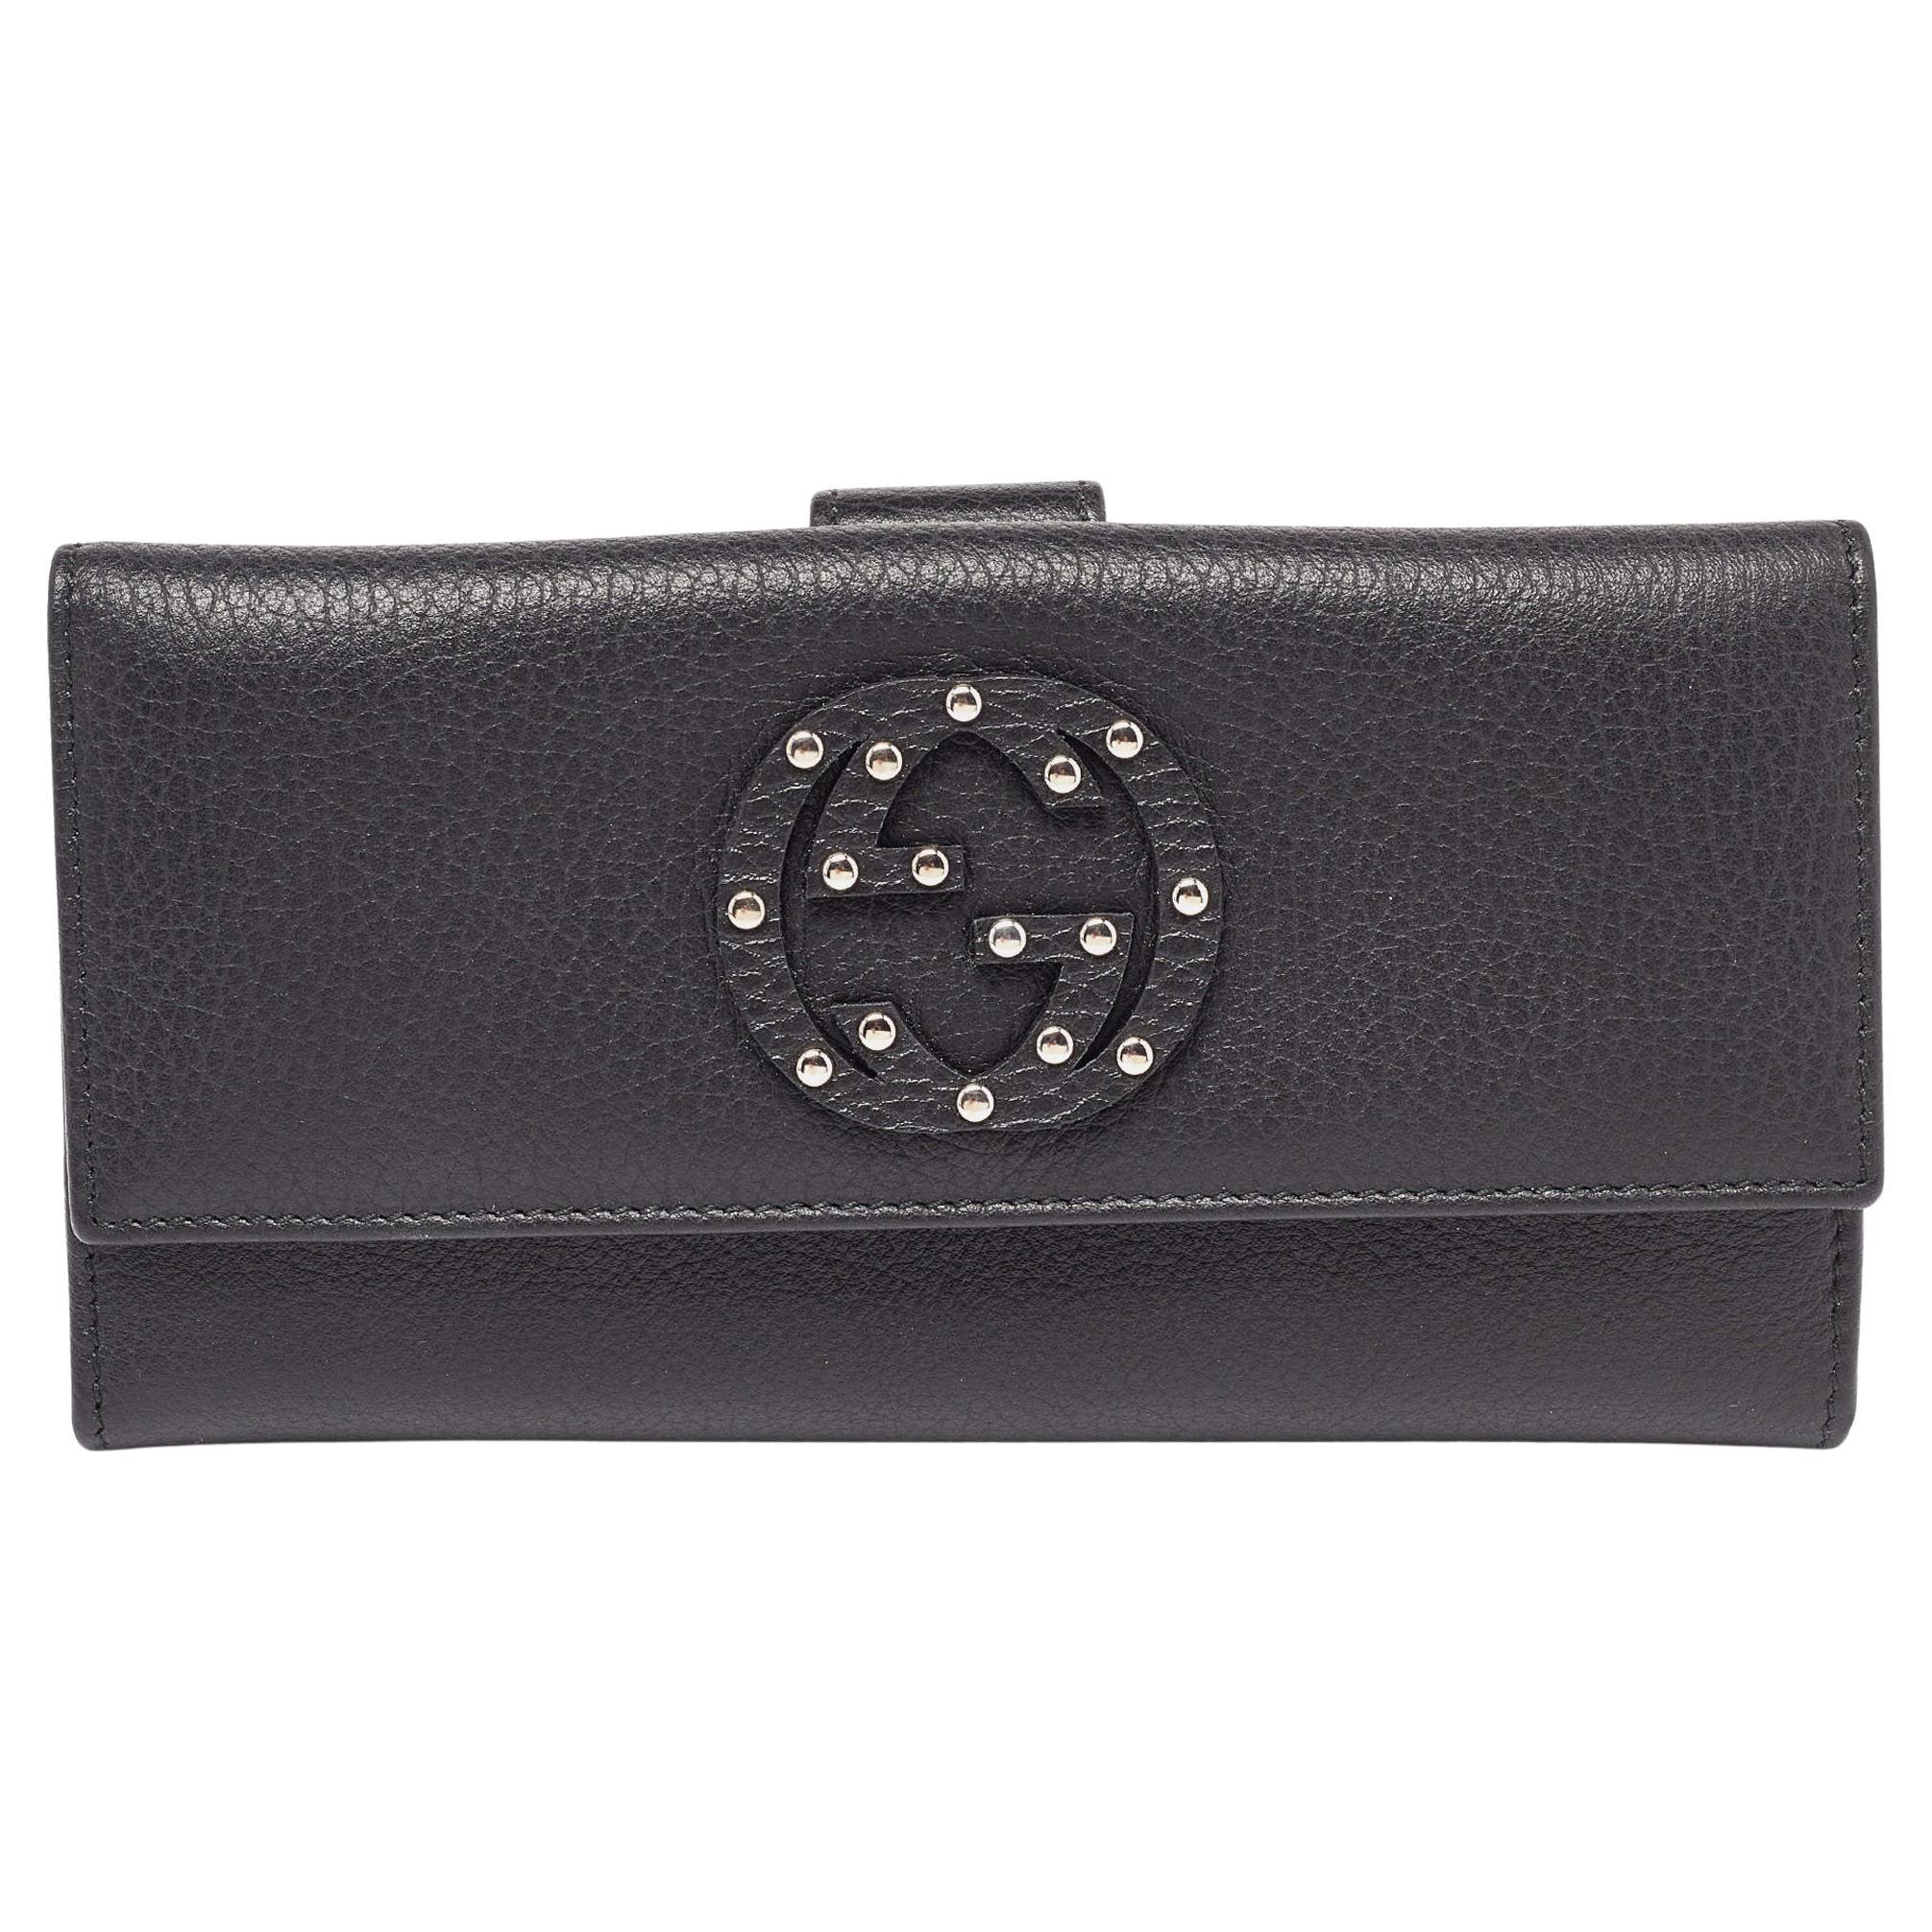 Gucci Black Leather Soho Studded Continental Wallet For Sale